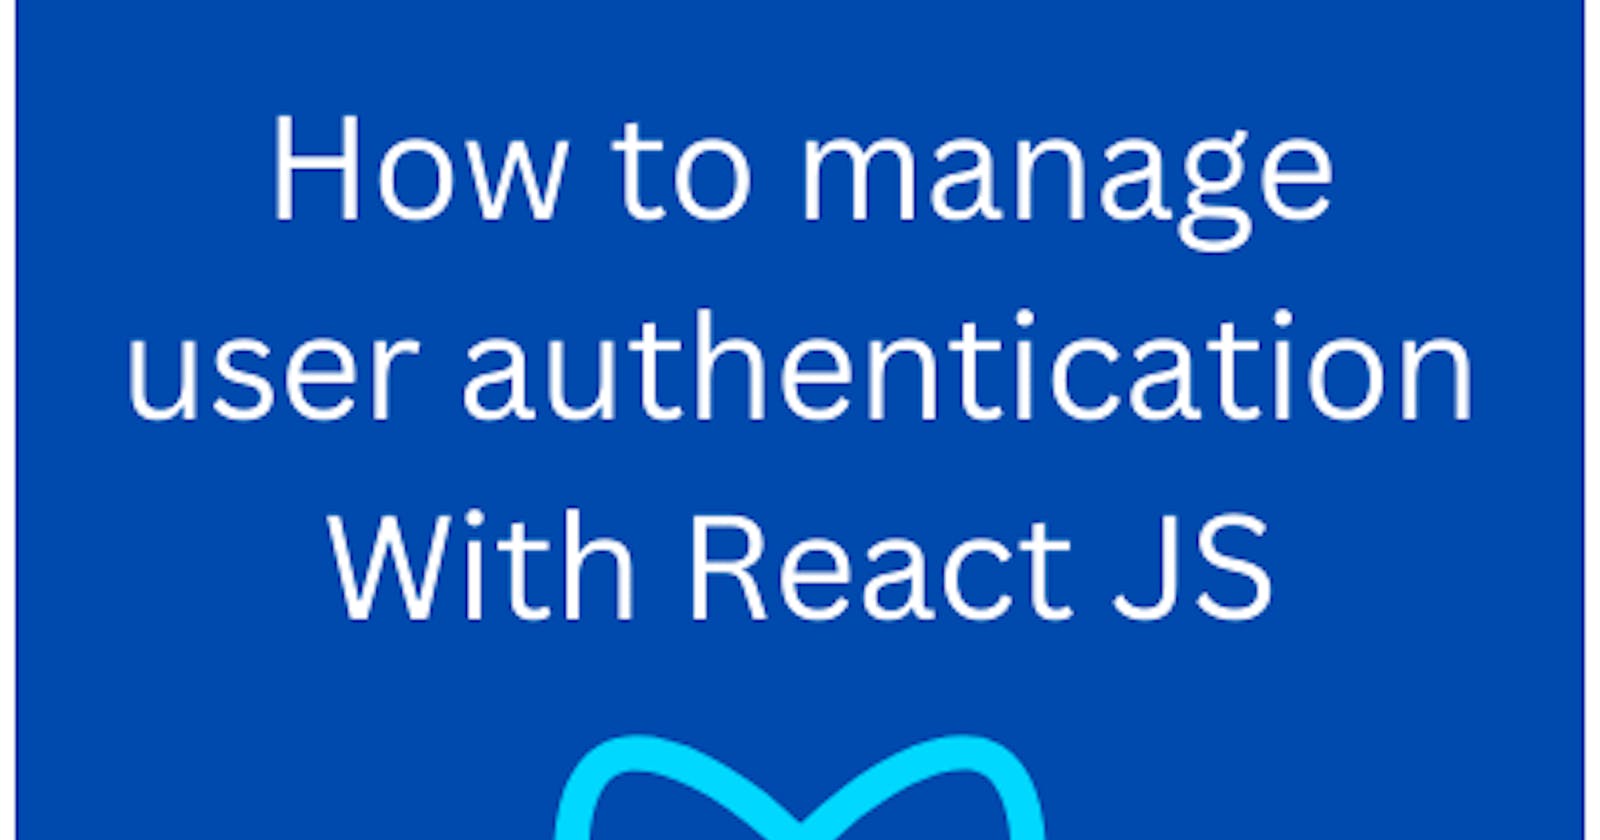 How to manage user authentication With React JS